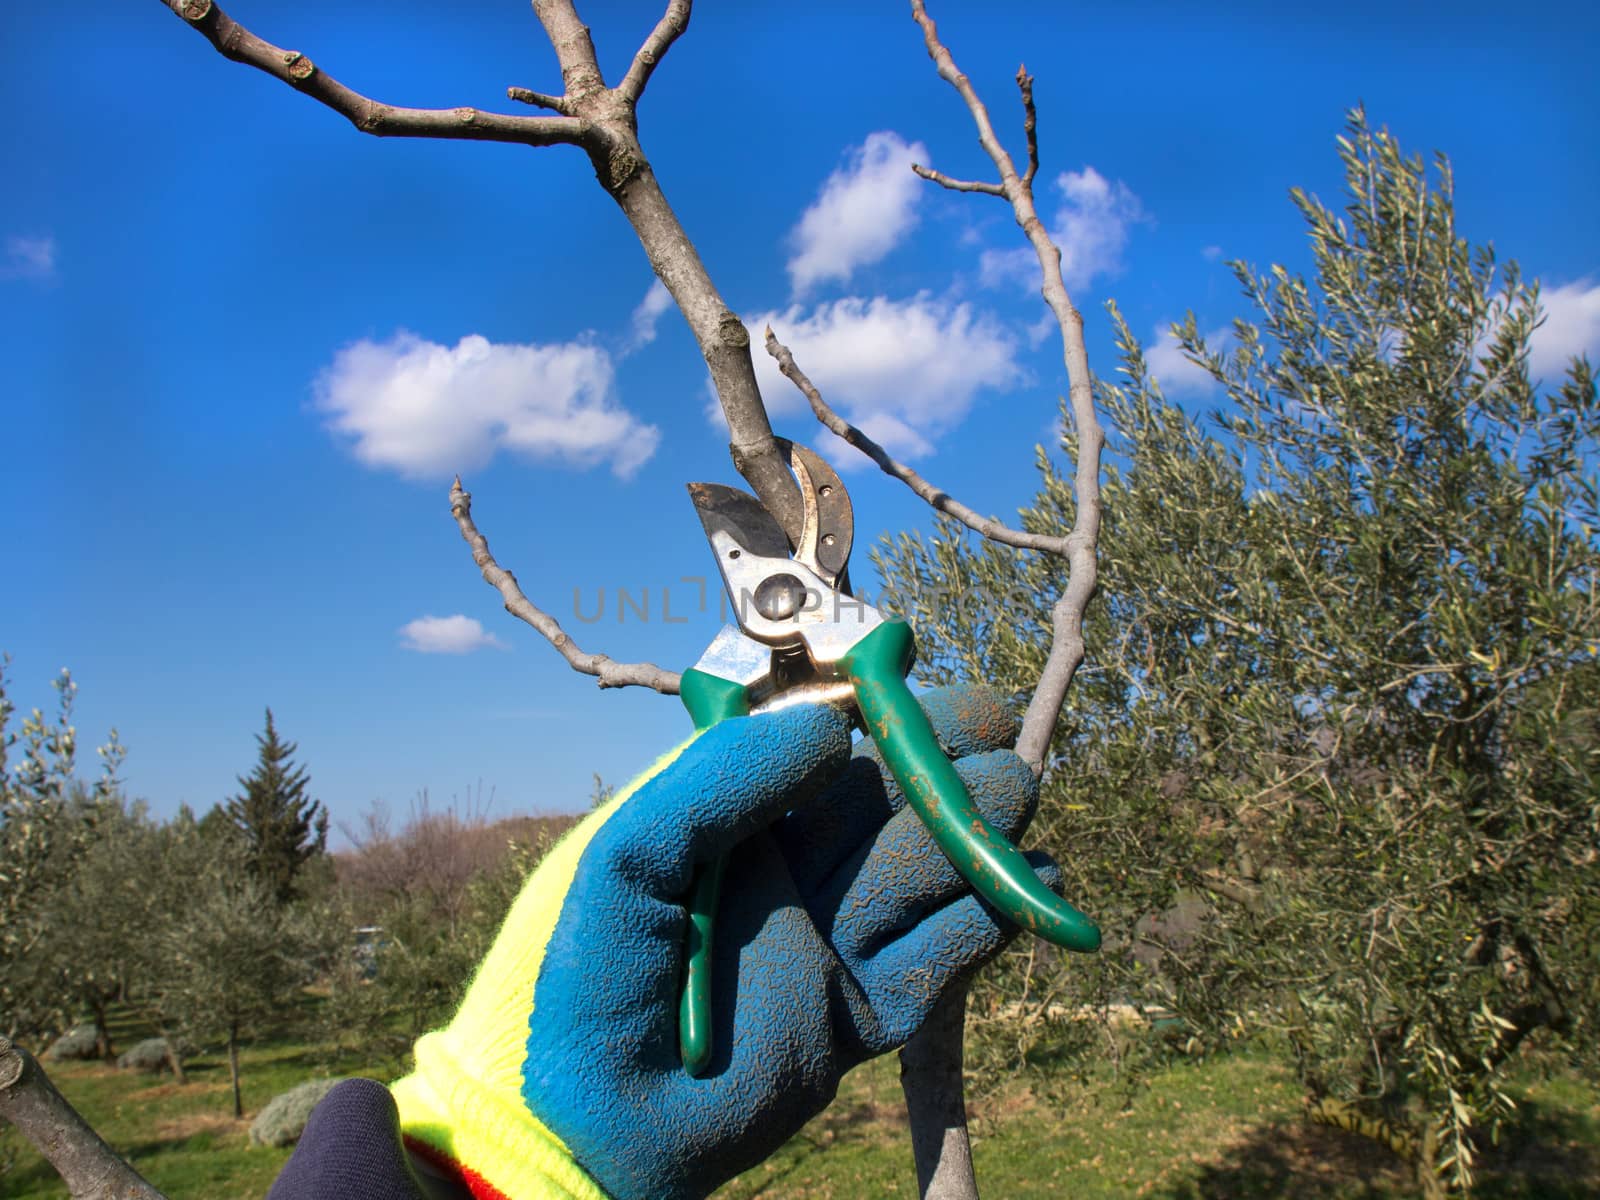 hand in the glove pruning with a scissors